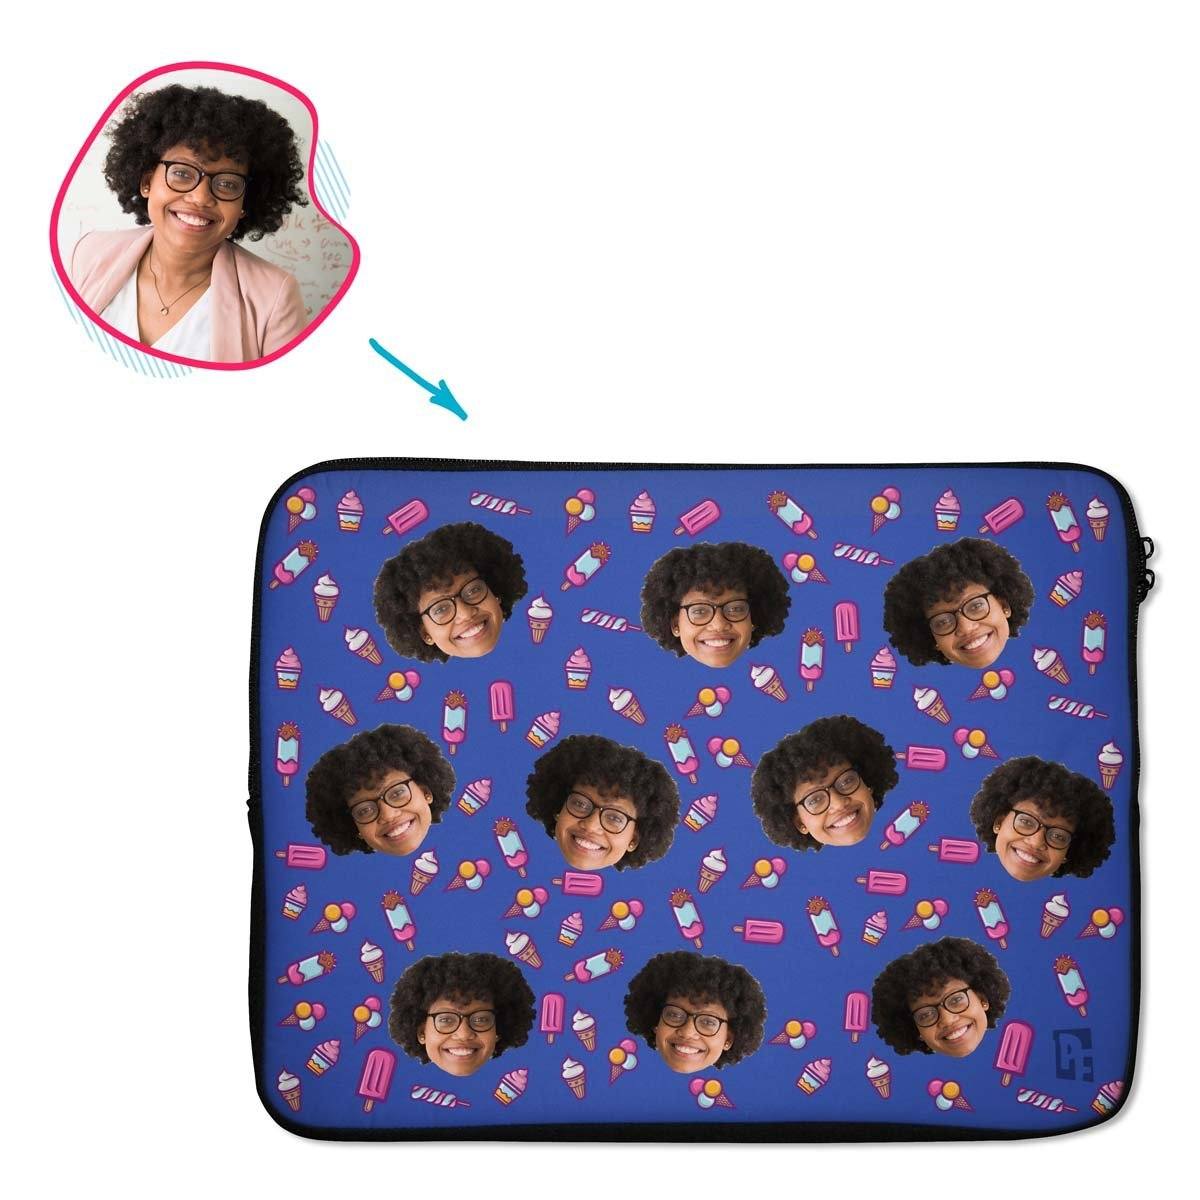 darkblue Candies laptop sleeve personalized with photo of face printed on them